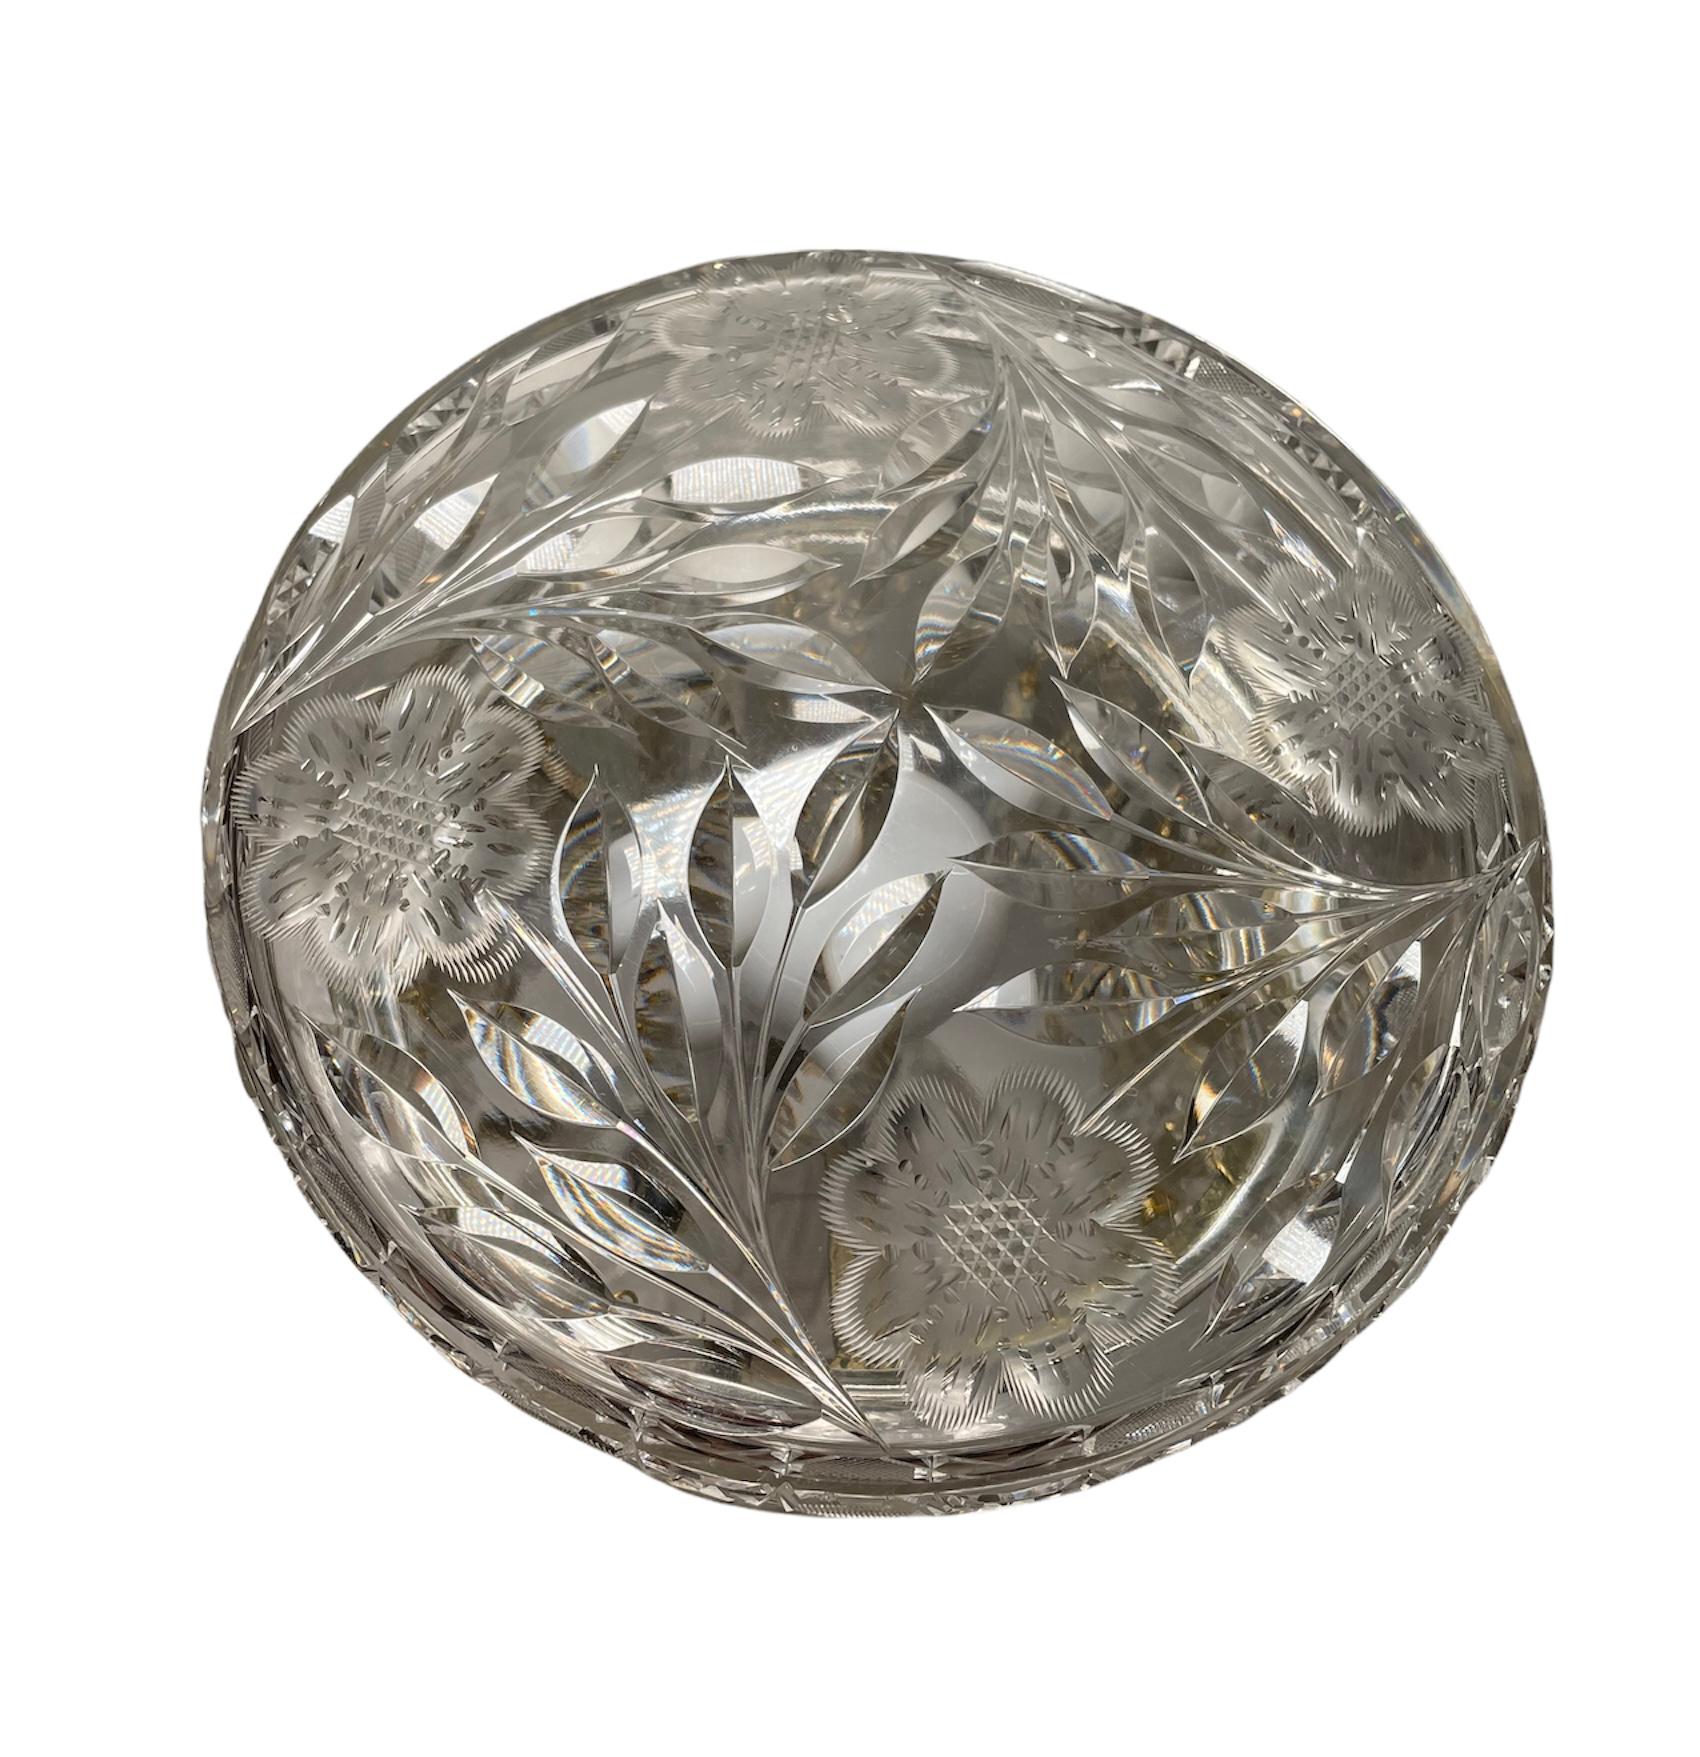 This is a cut crystal mushroom shaped small table lamp. The lamp consists of a shade and a column with a round base. The lamp shade and base are adorned with etched branches of leaves and flowers with eighth petals. The borders of them are decorated